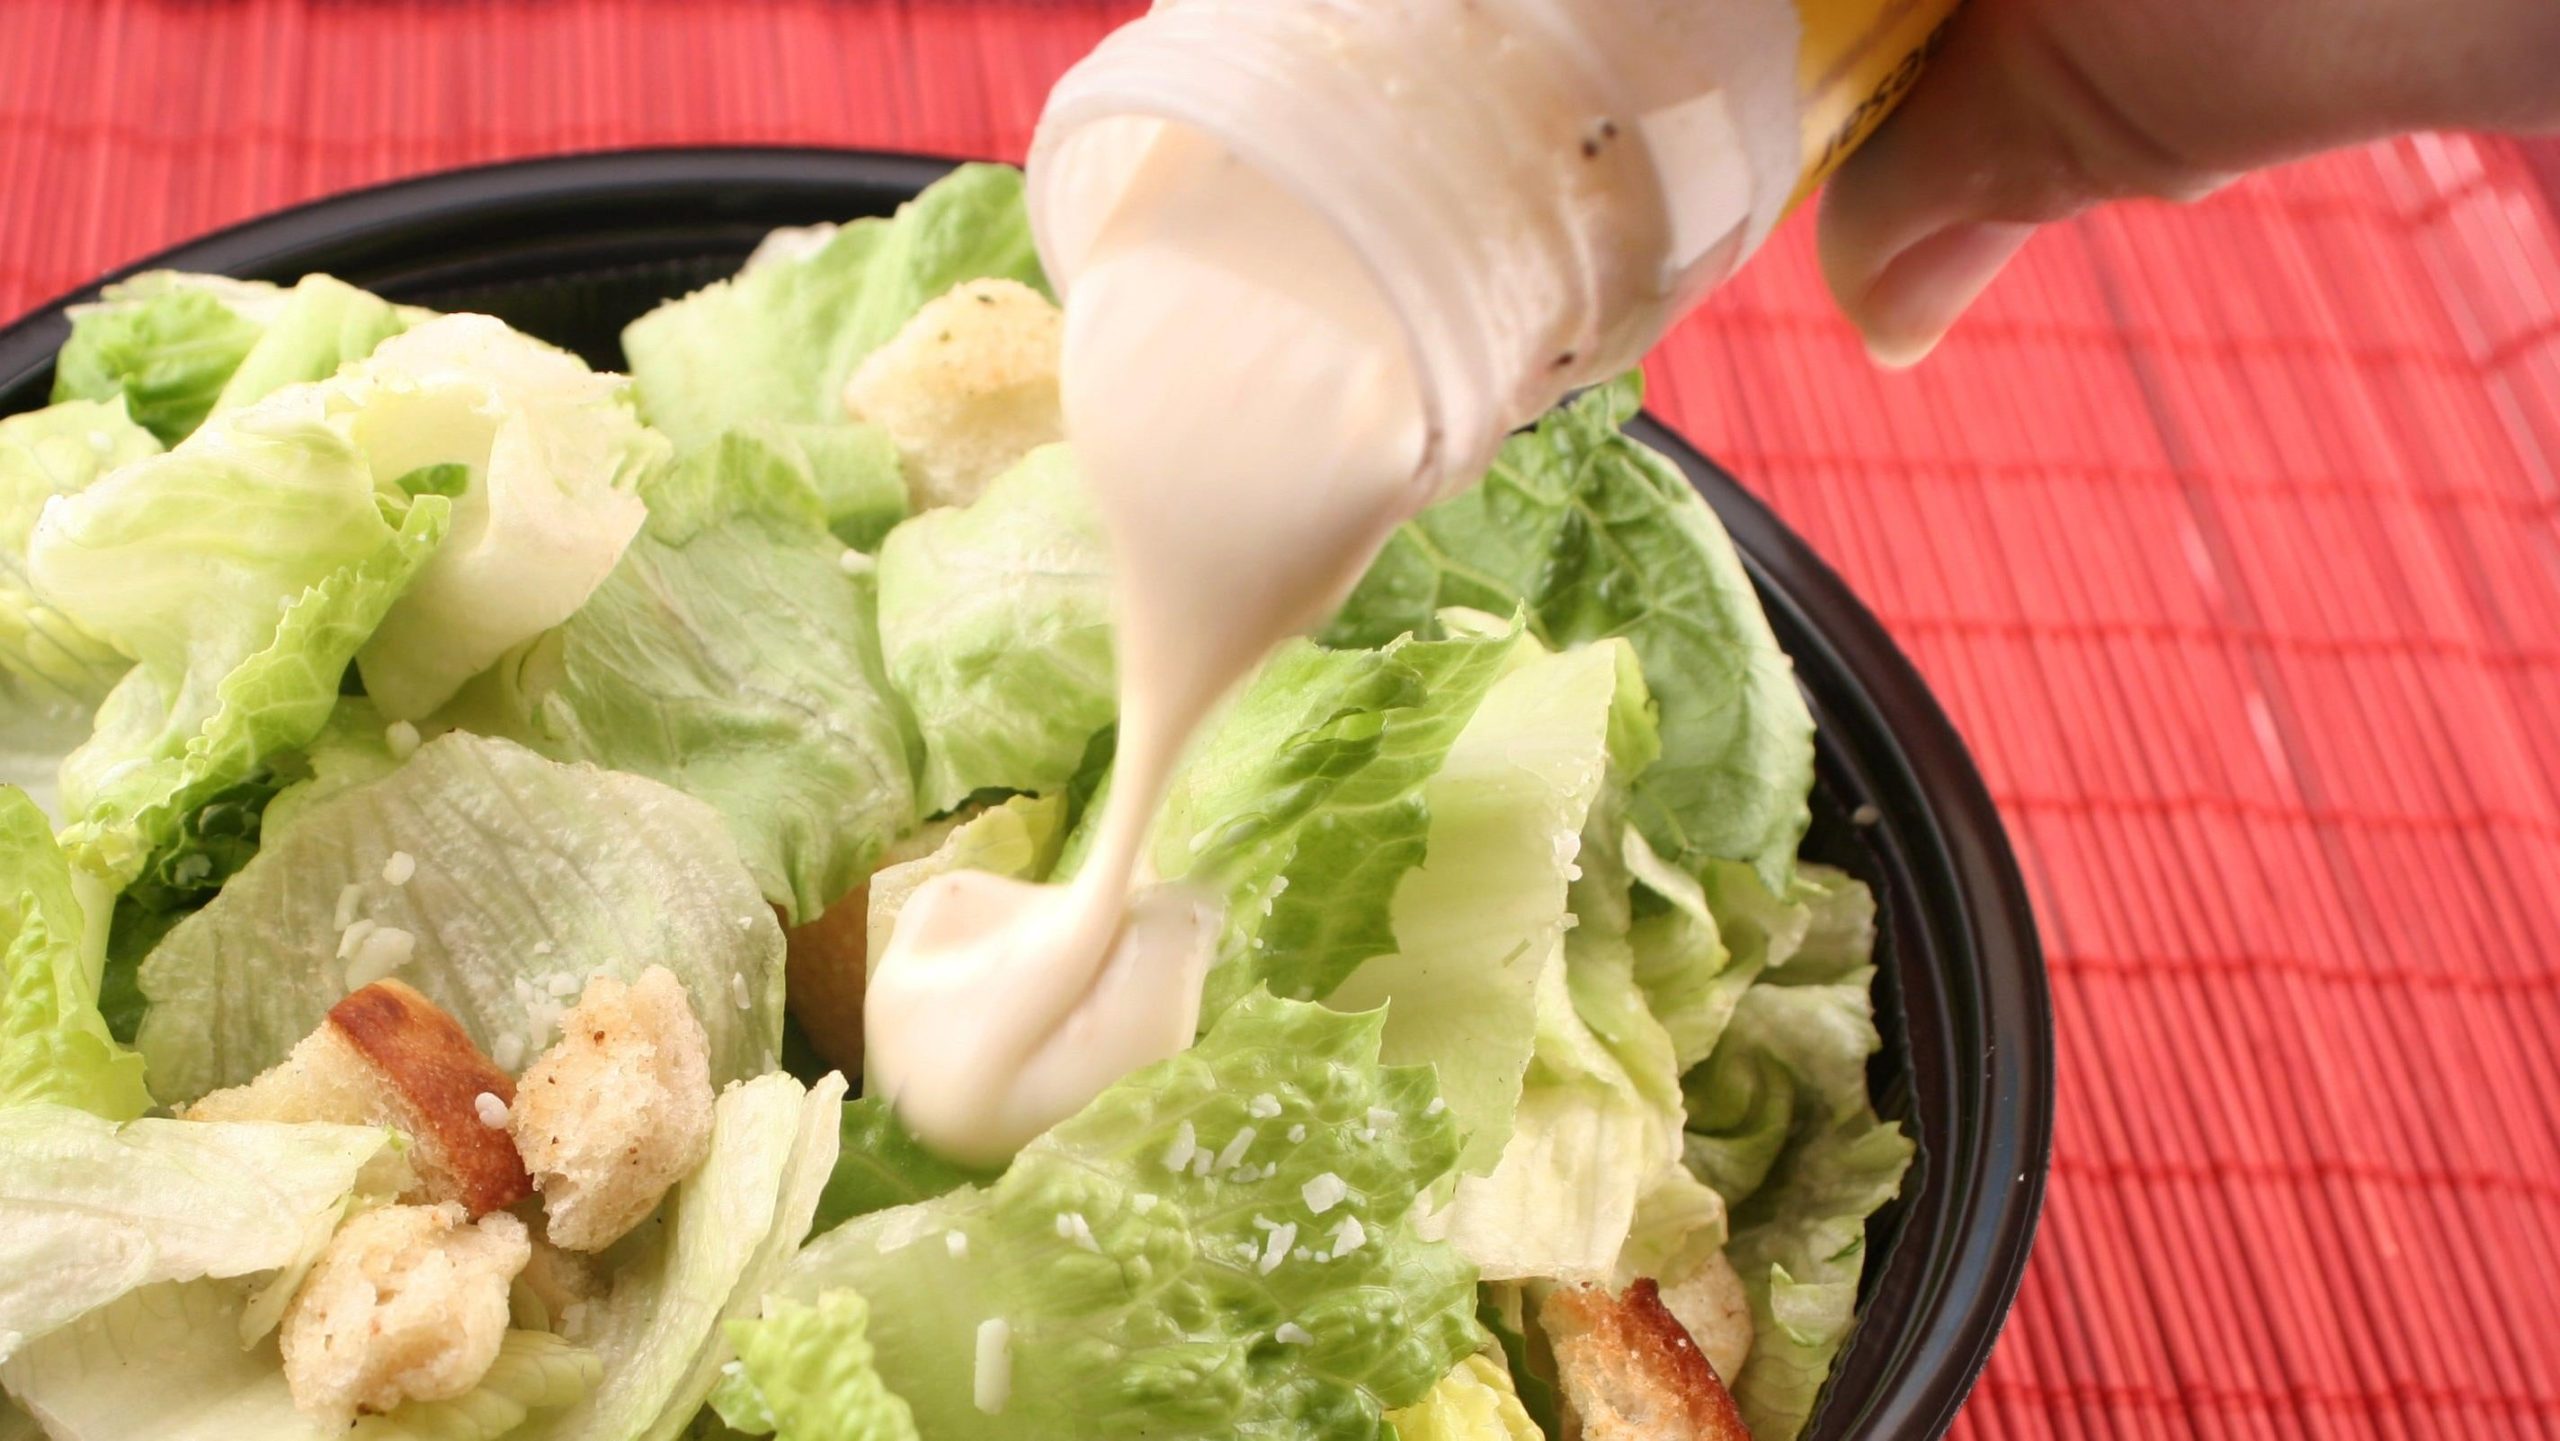 How Dangerous Is Expired Salad Dressing?